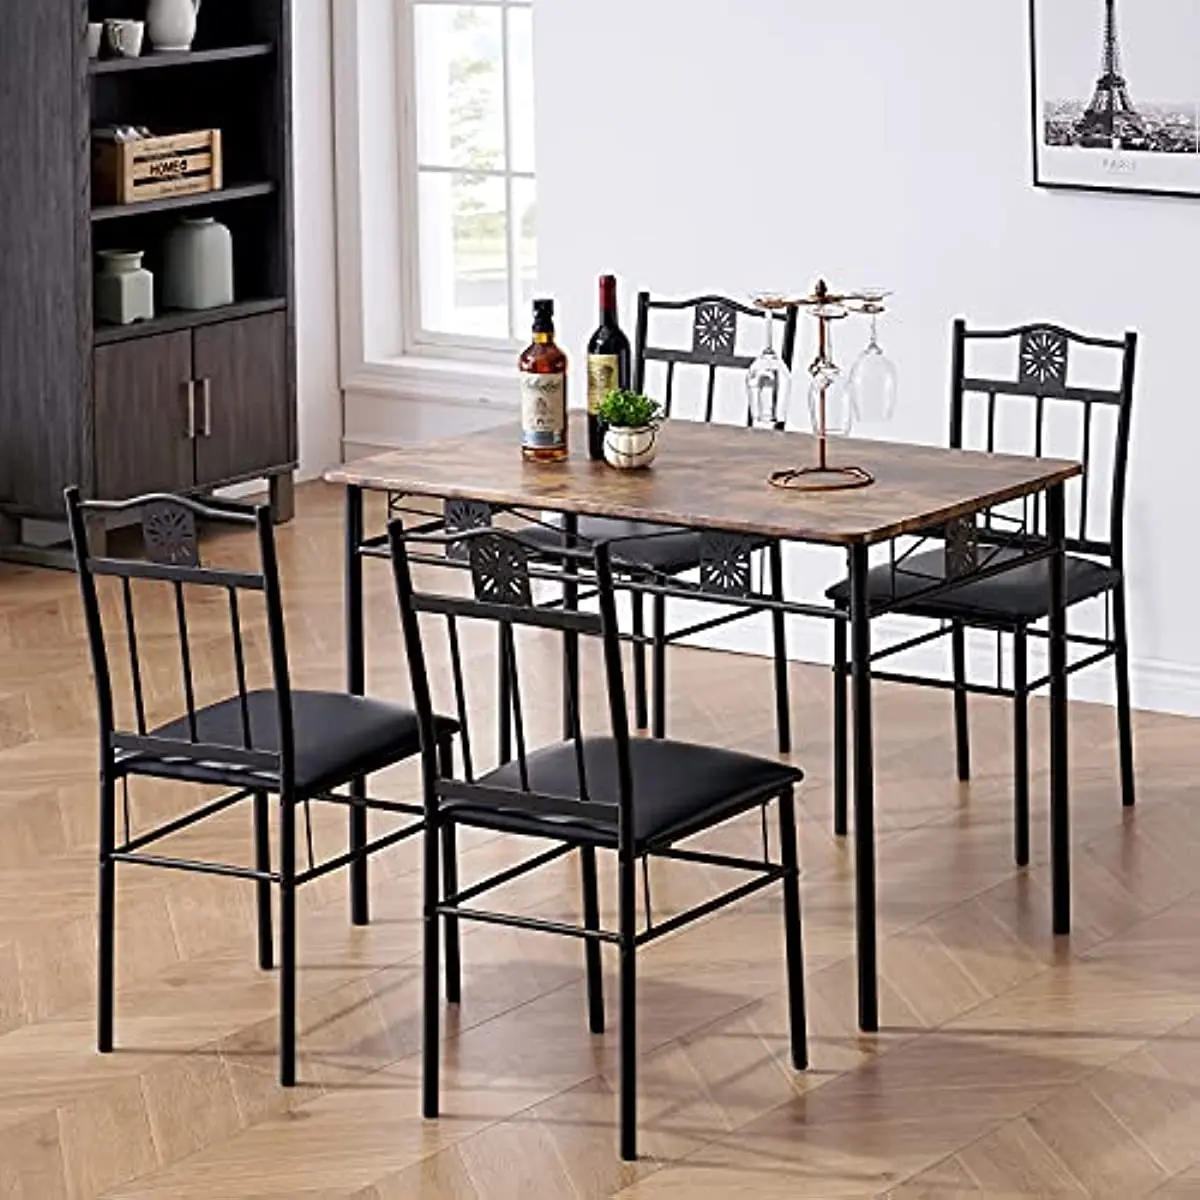 

Kitchen Dining Room Table Sets for 4, 5 Piece Metal and Wood Rectangular Breakfast Nook, Dinette with Chairs, Retro-Brown